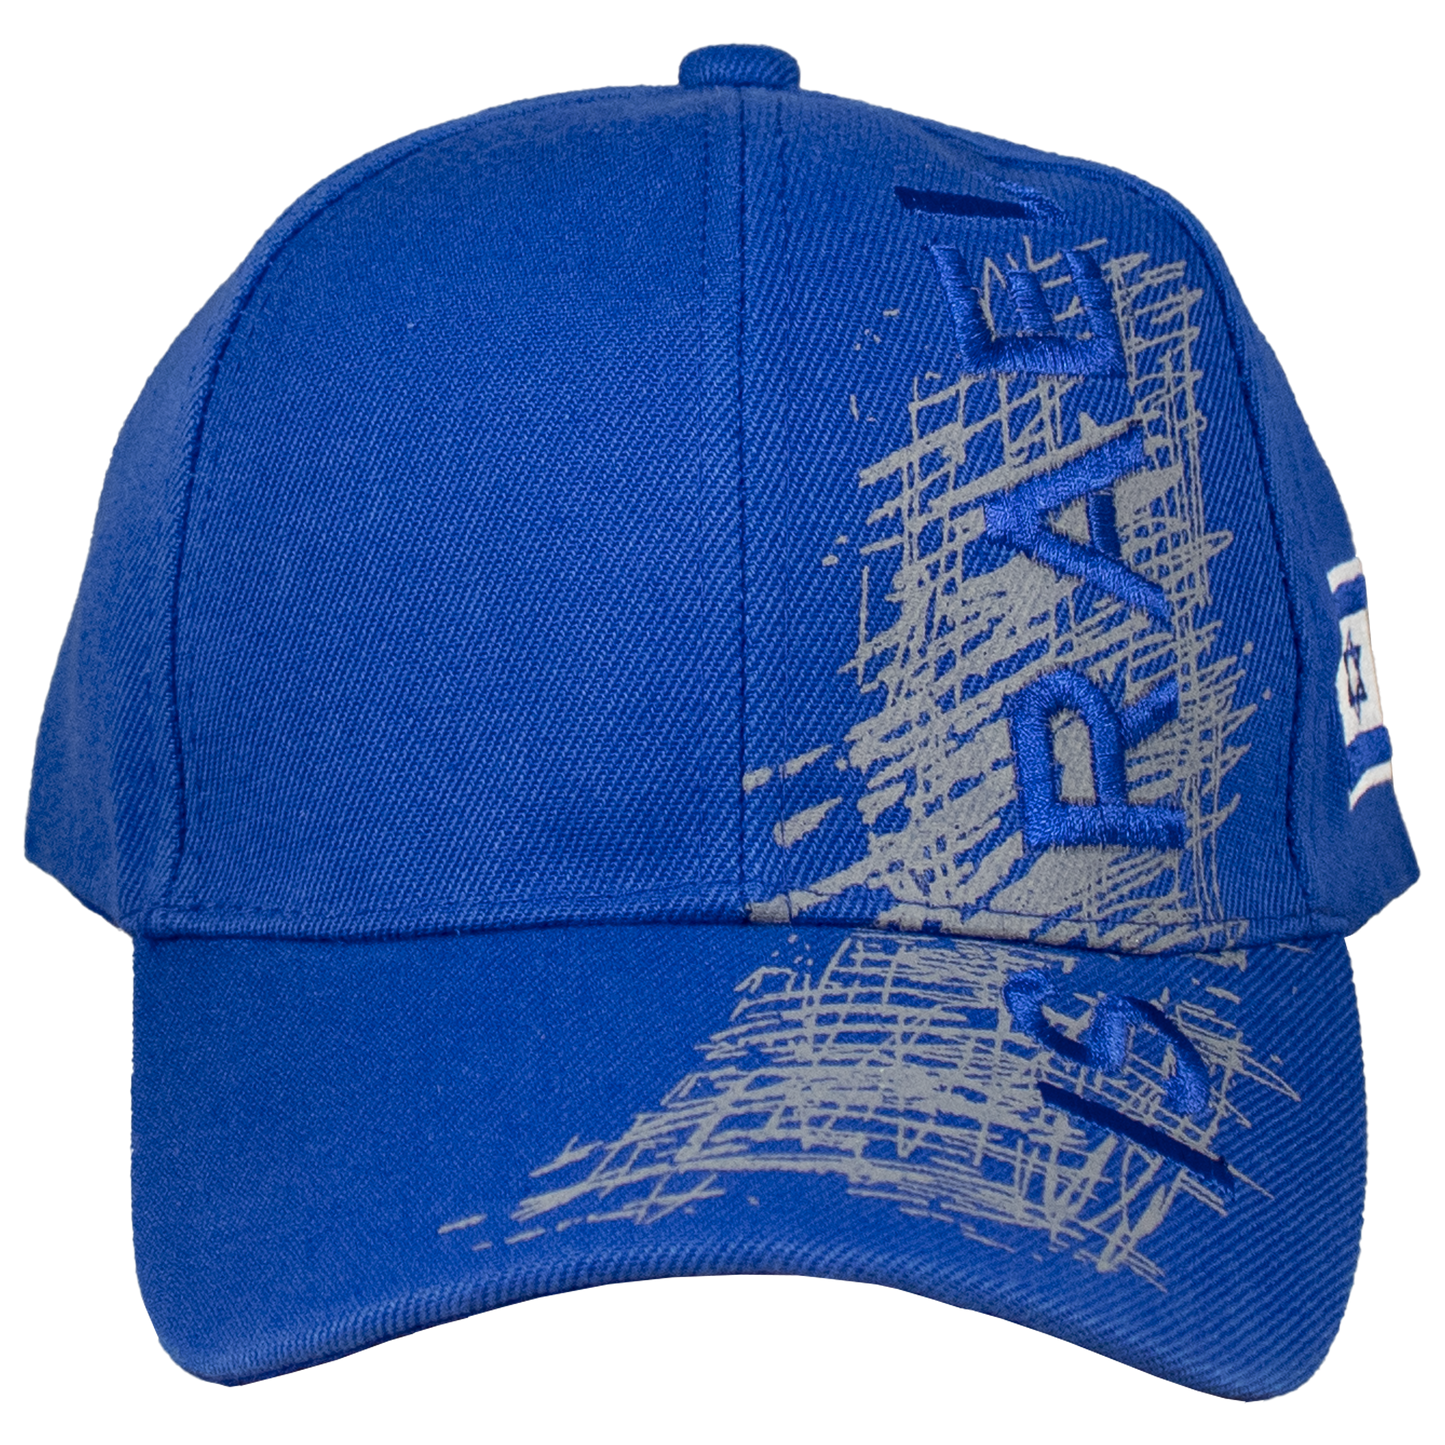 Blue cotton baseball style cap with embroidered "Israel" along the front and Israel's Flag on the side 